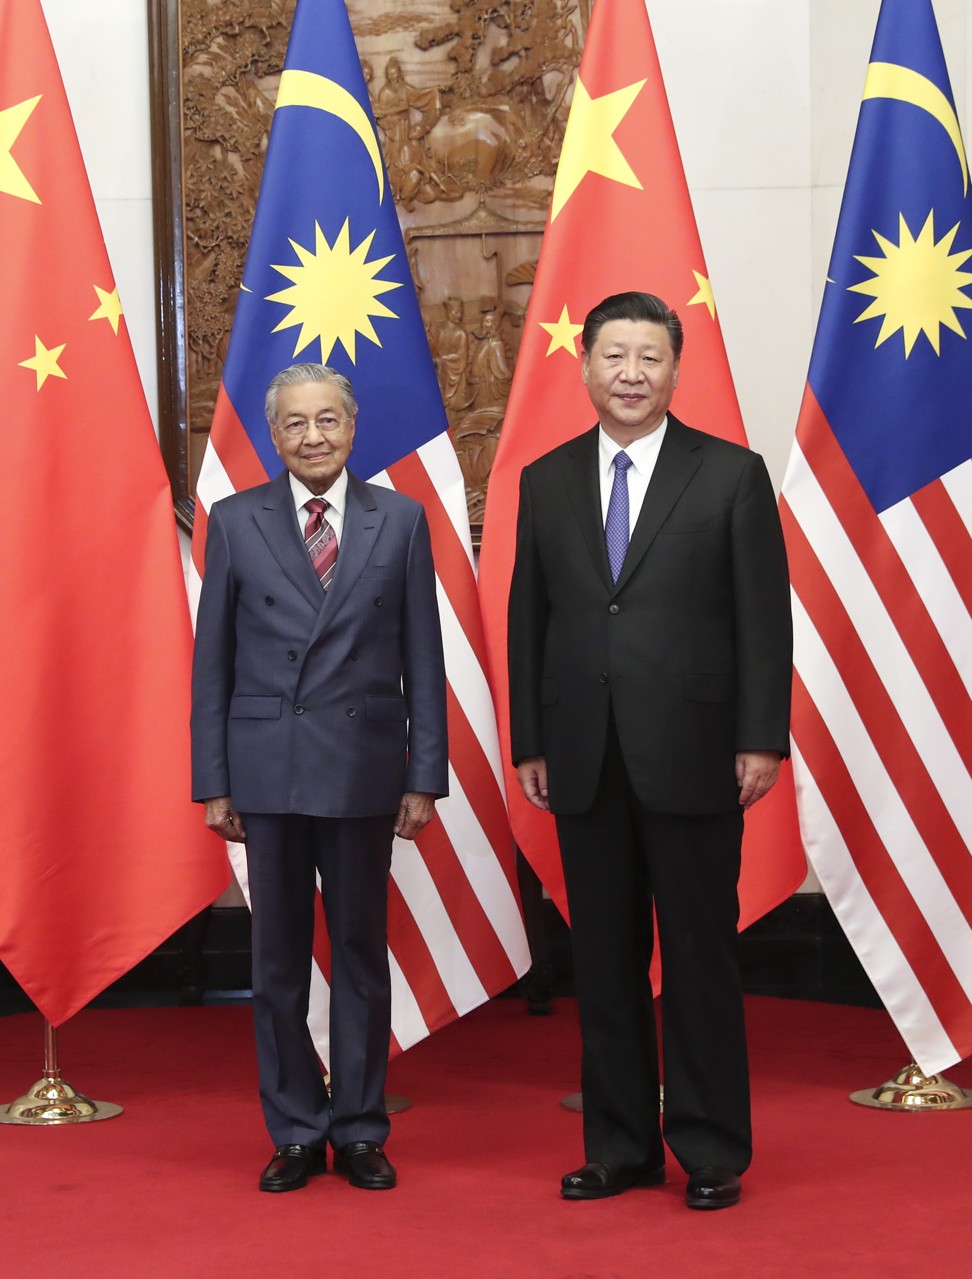 Malaysian Prime Minister Mahathir Mohamad and Chinese President Xi Jinping. Photo: Xinhua